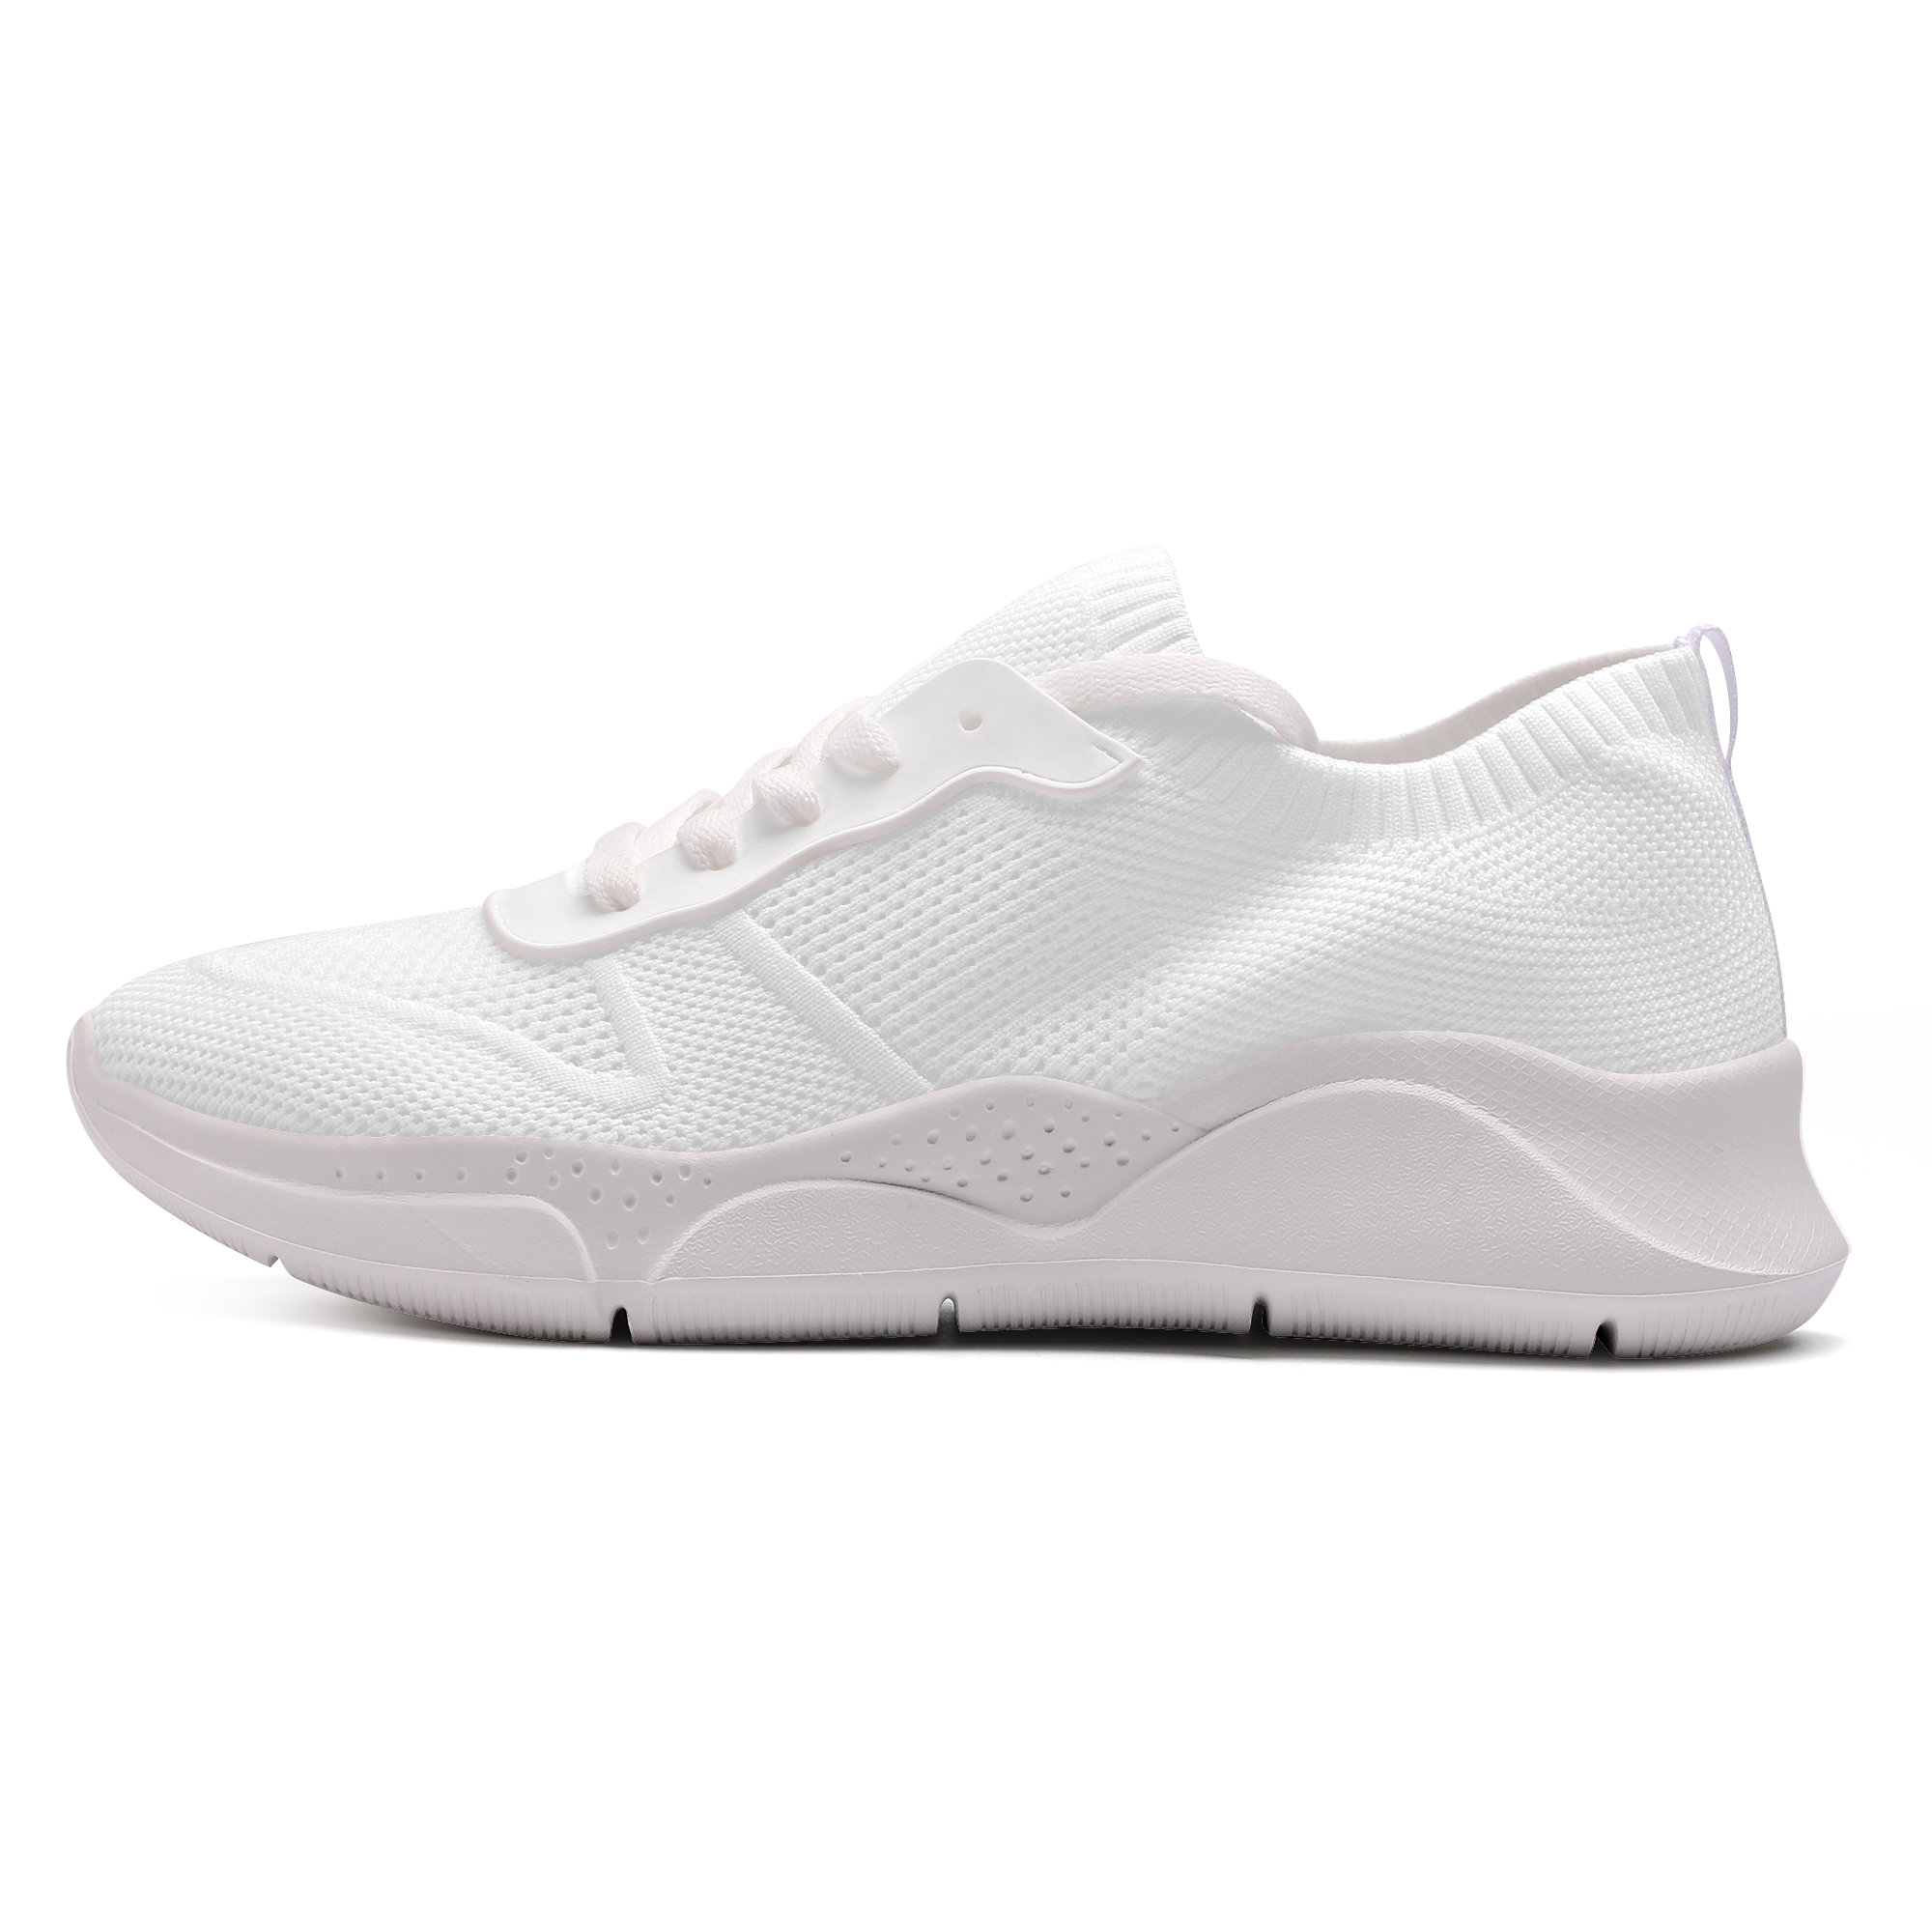 Women's Athletic Sneakers - Mesh with High Arch Support - Shoe Zero